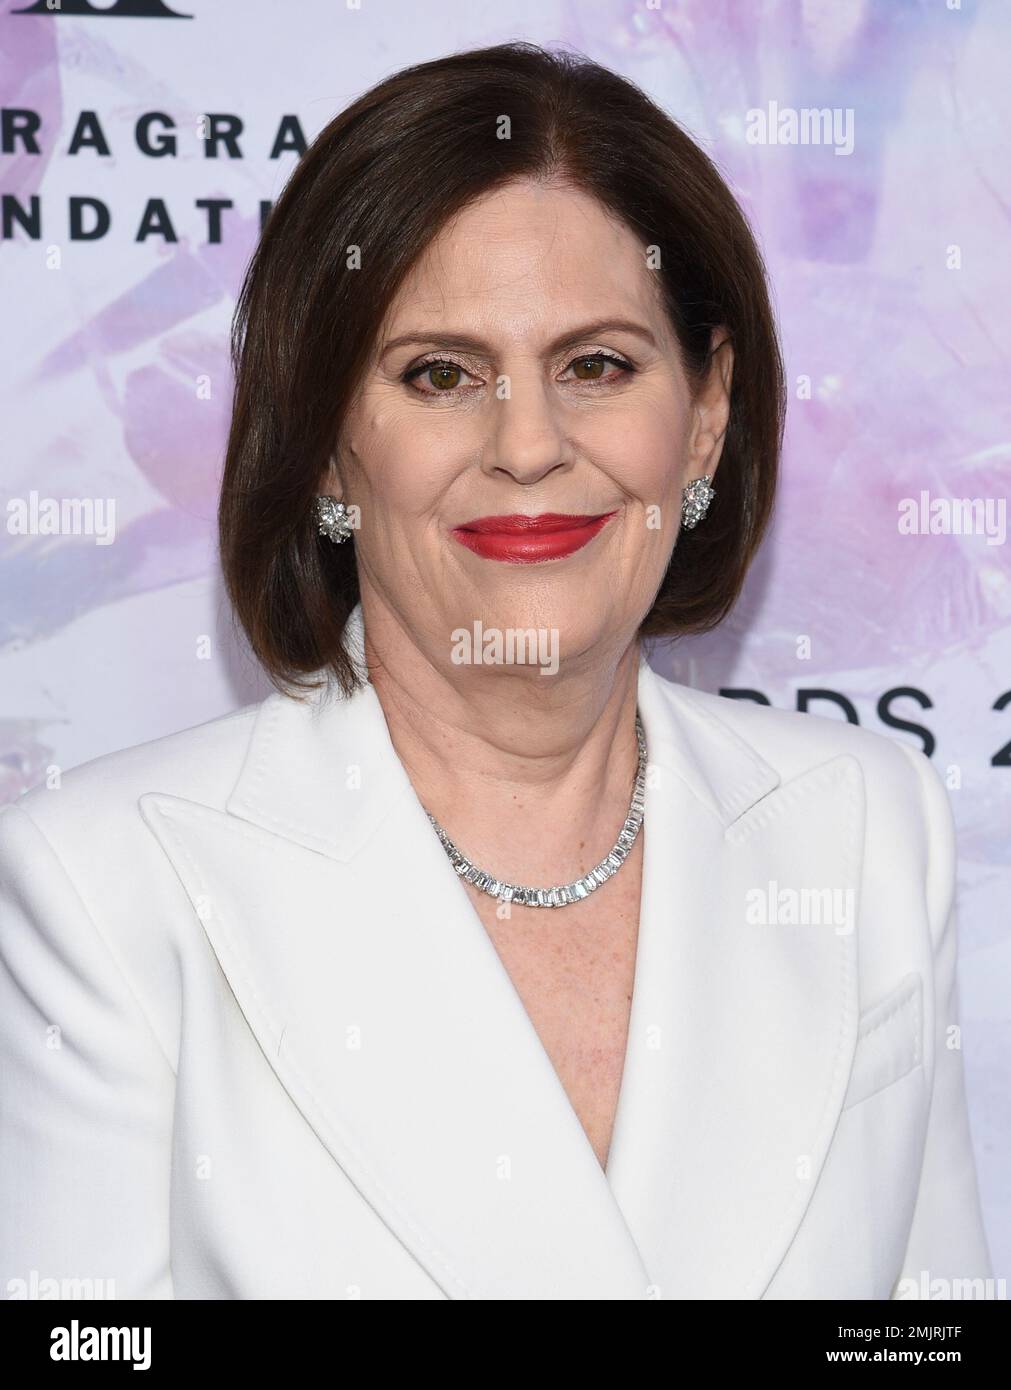 Synes Væk efterfølger The Fragrance Foundation president Linda Levy attends the Fragrance  Foundation Awards at the David H. Koch Theater at Lincoln Center on  Wednesday, June 5, 2019, in New York. (Photo by Evan Agostini/Invision/AP